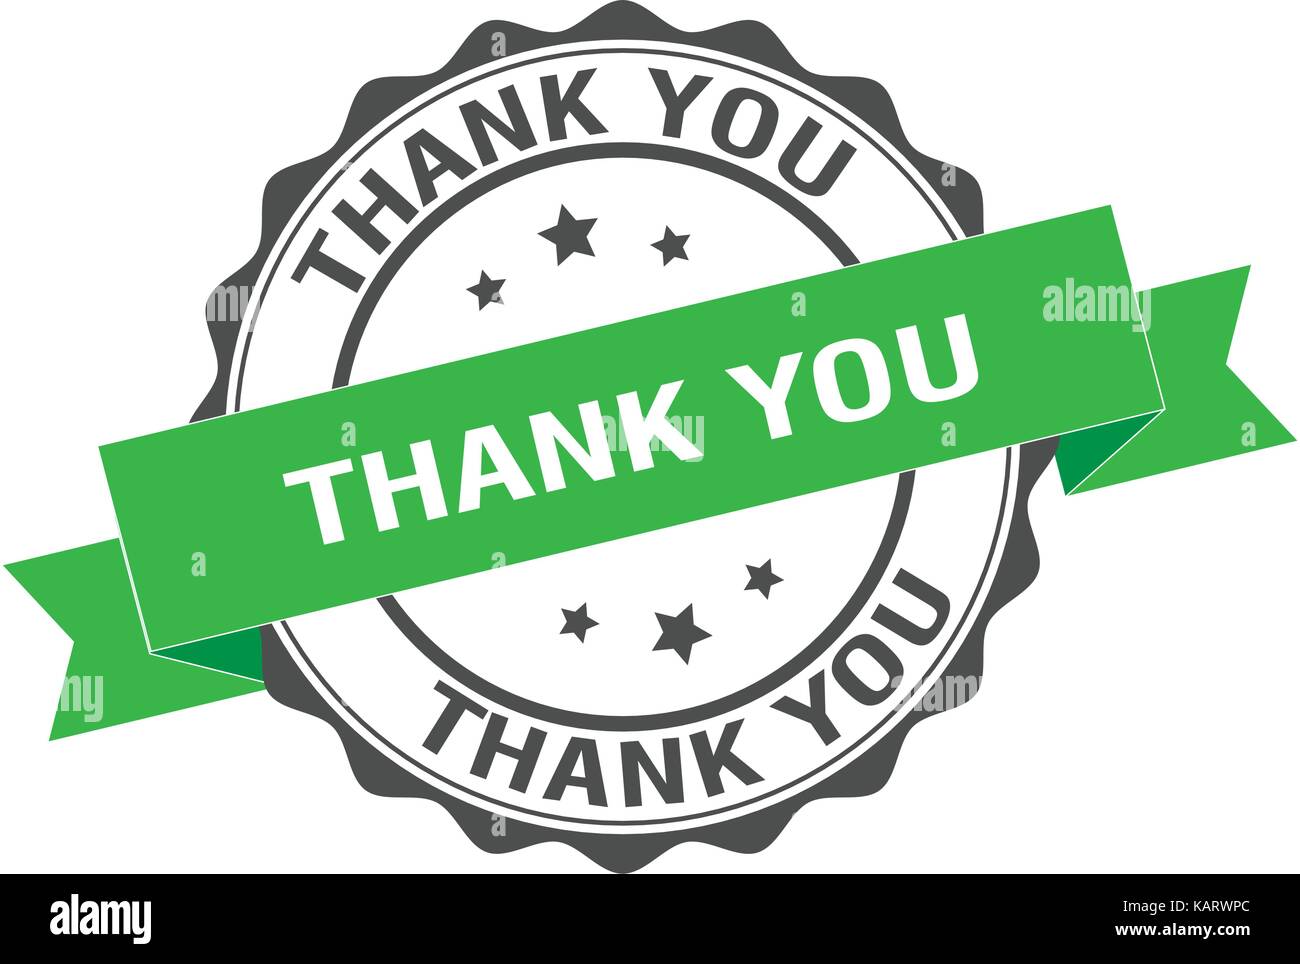 Thank You Stamp Illustration Stock Vector - Illustration of vector